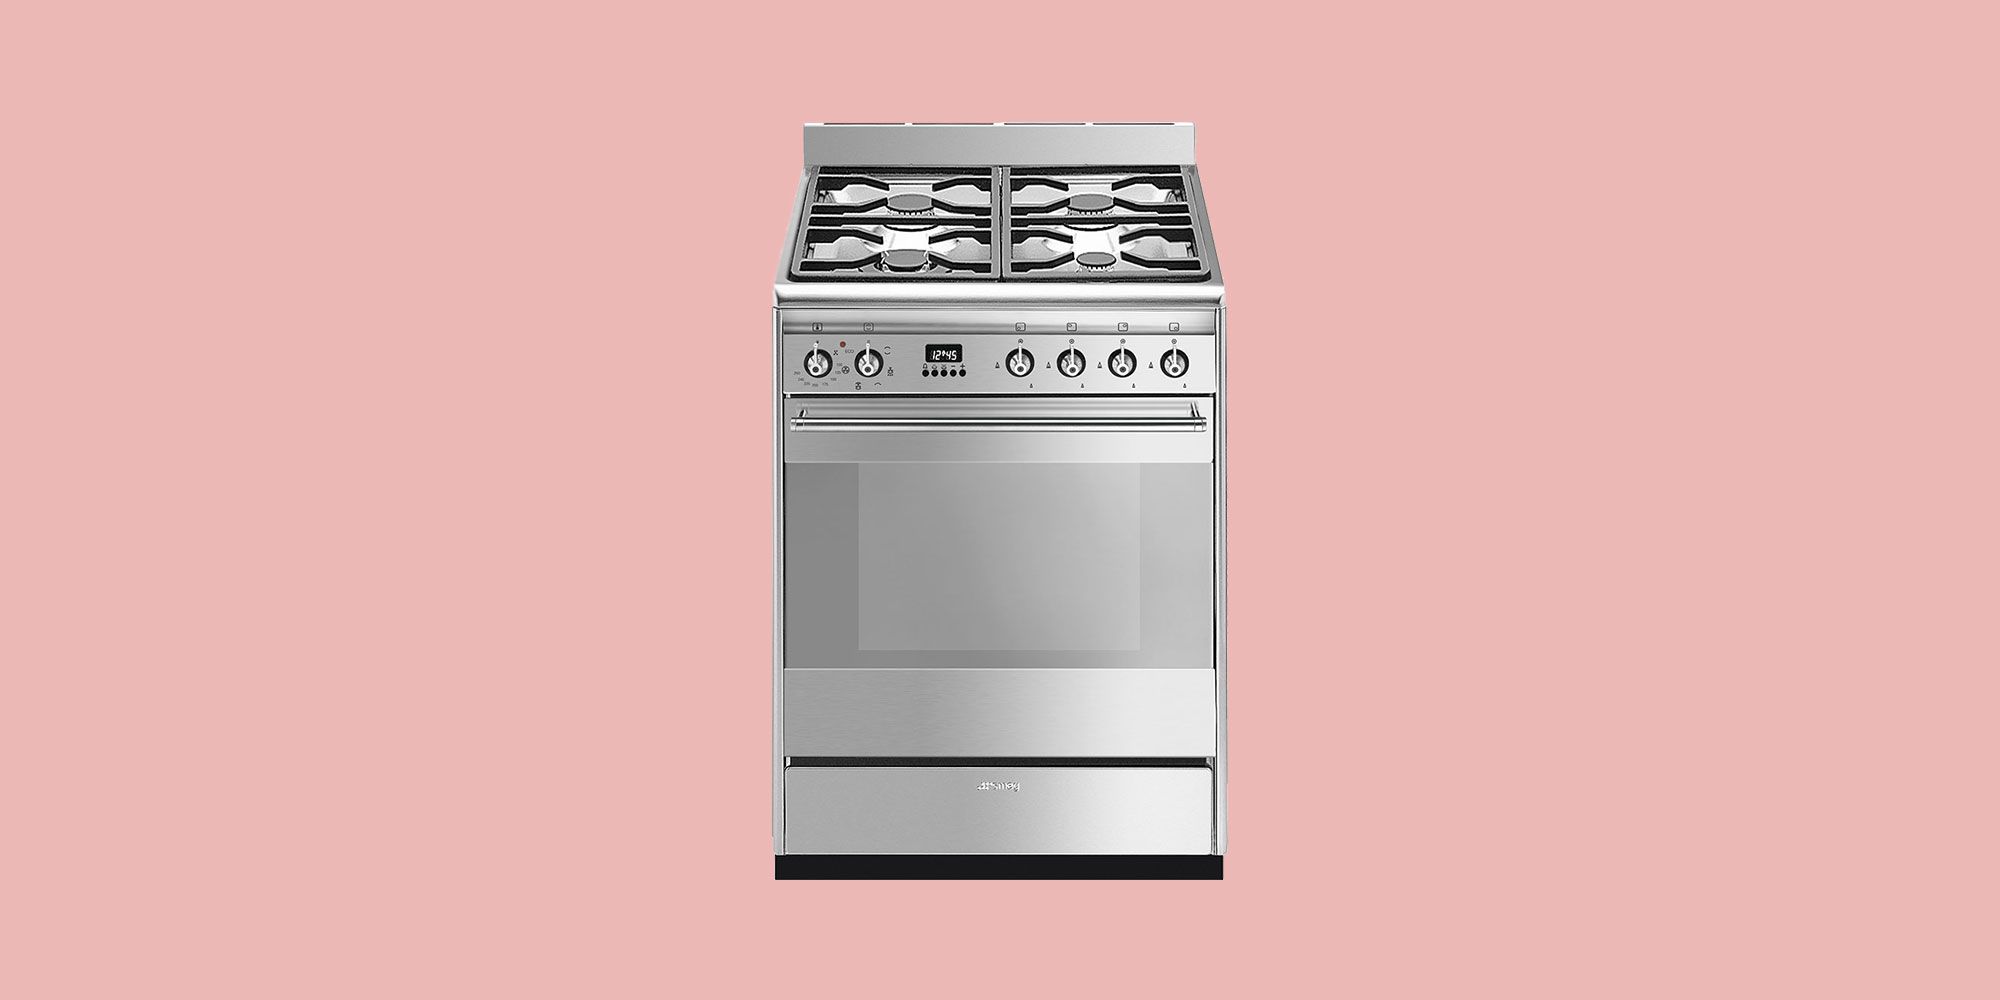 electric cooker 550mm wide